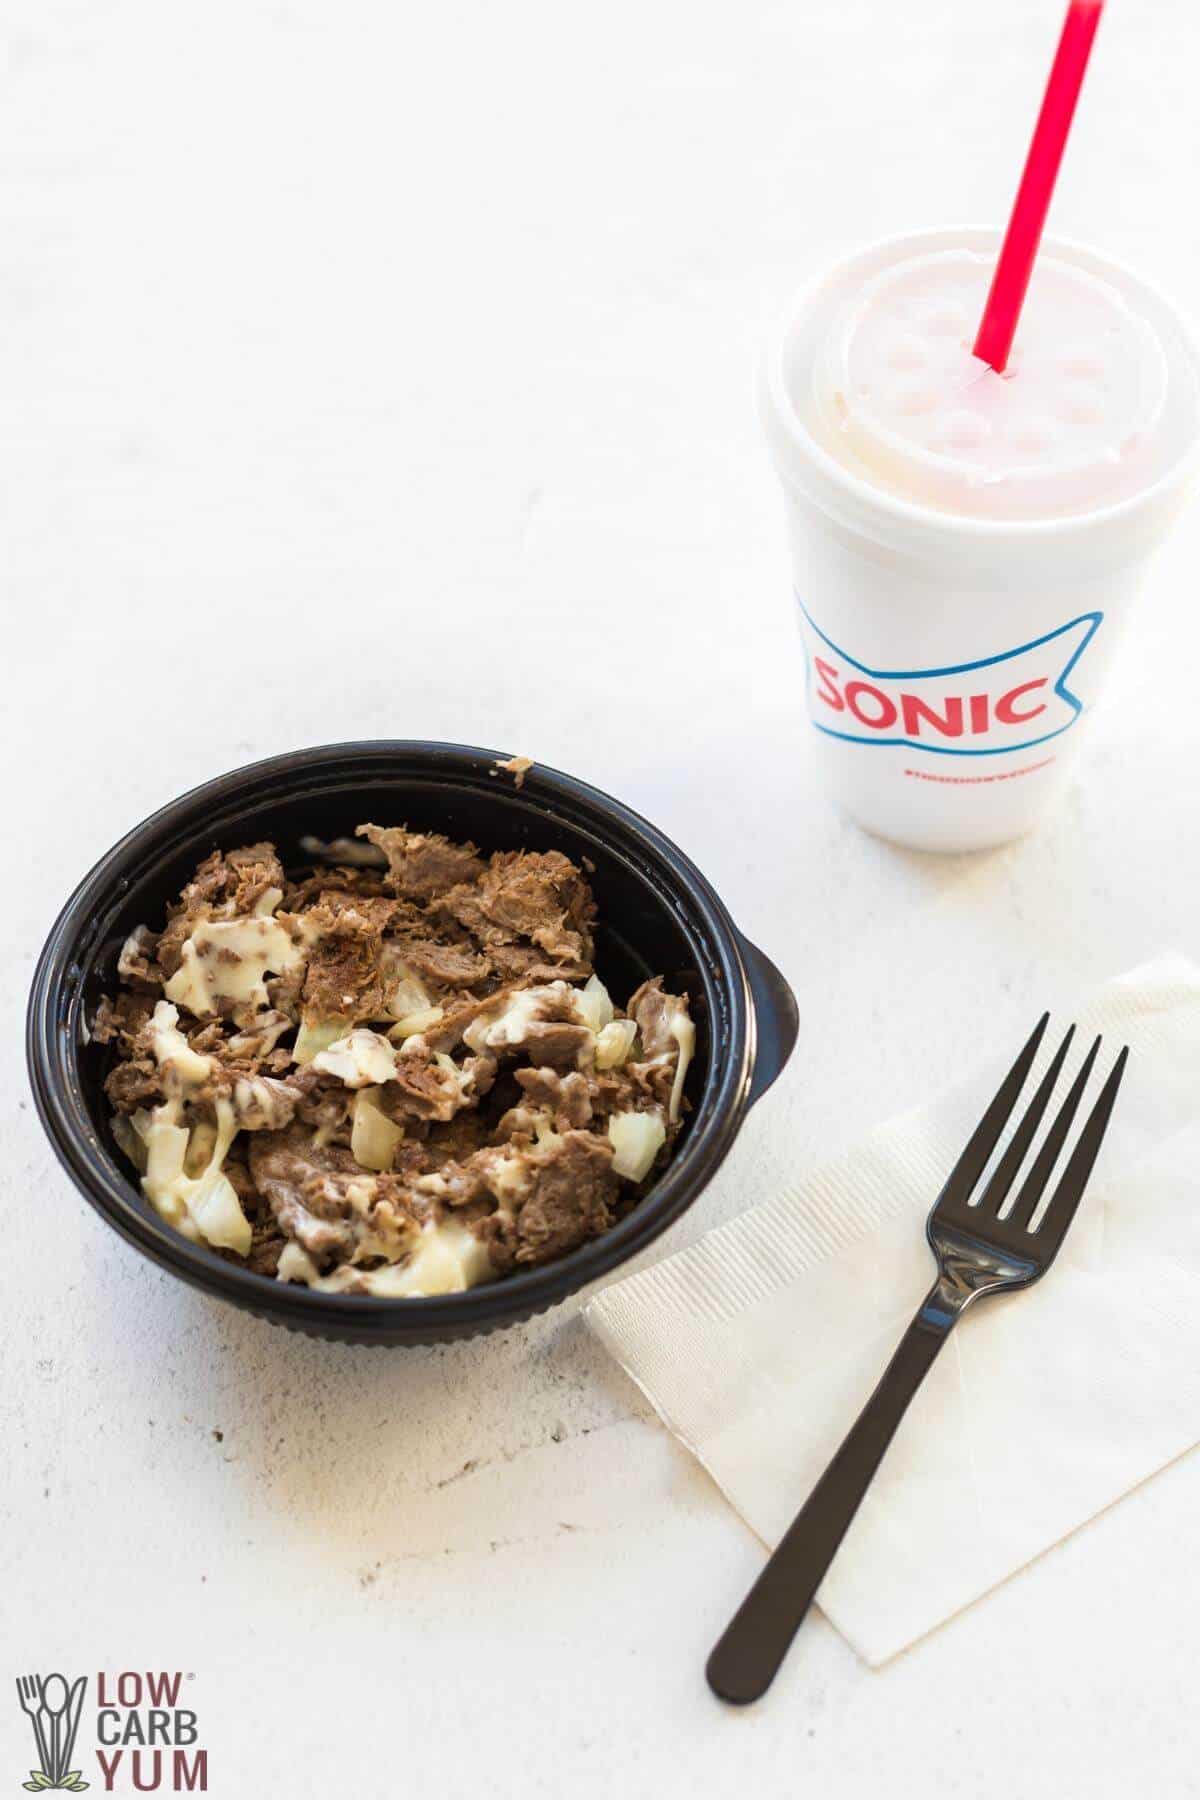 sonic philly cheesesteak without bread.